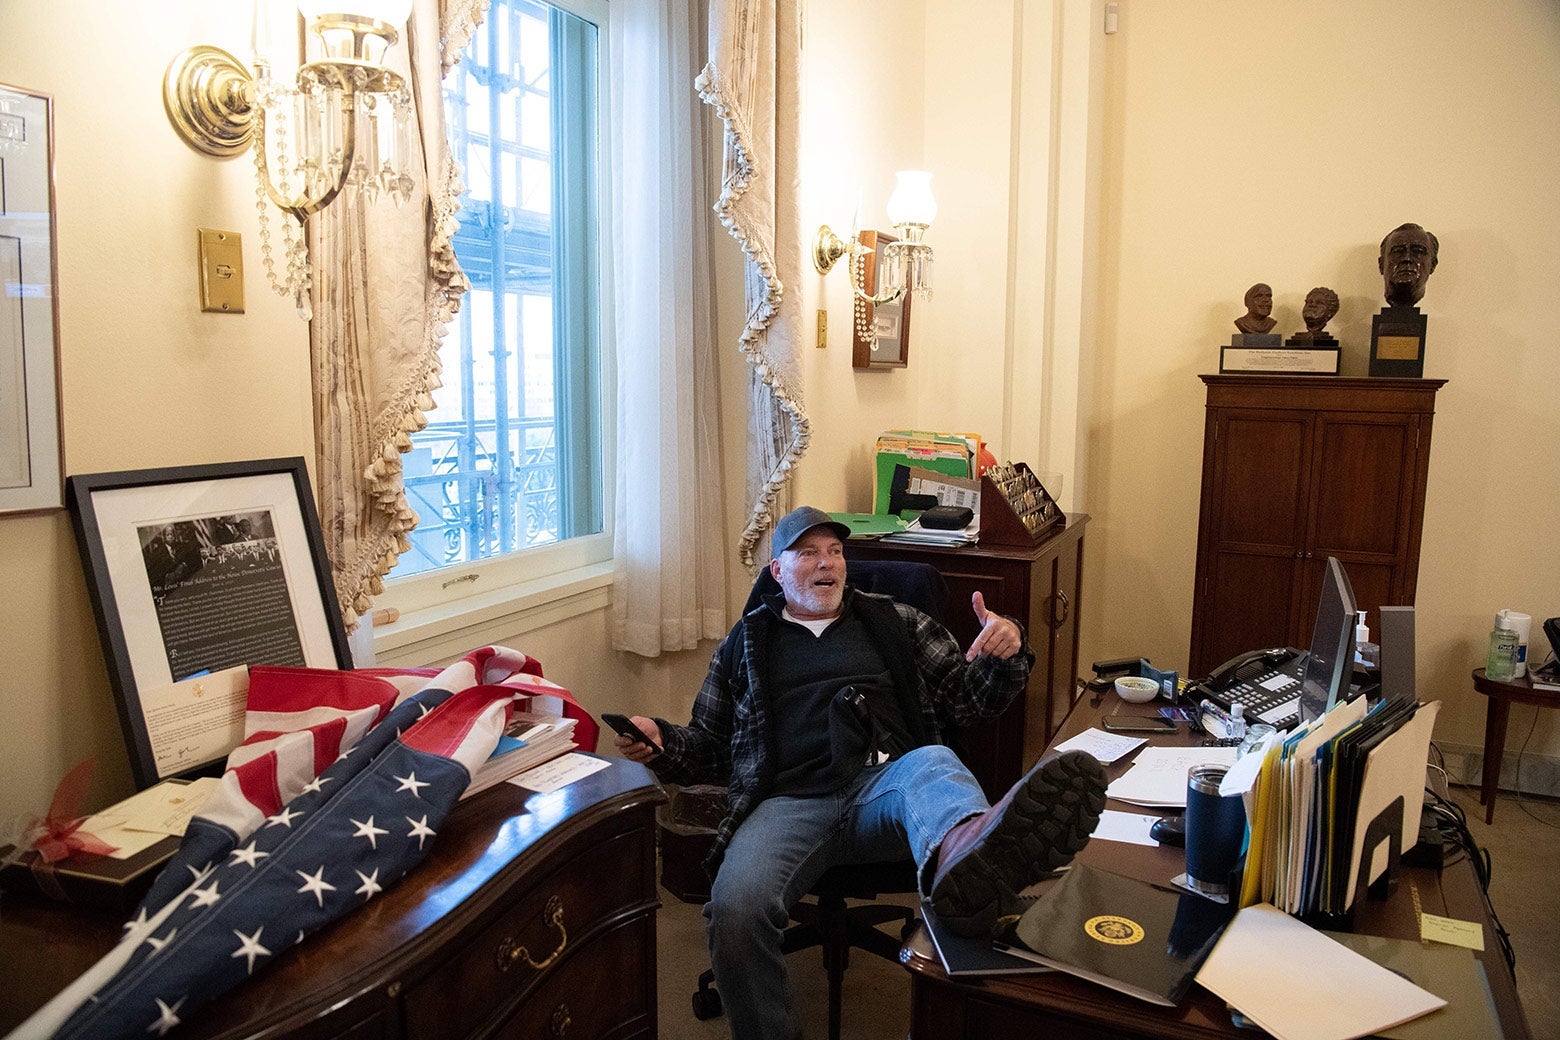 A man in a baseball cap sits with his left foot up on Speaker of the House Nancy Pelosi's desk.